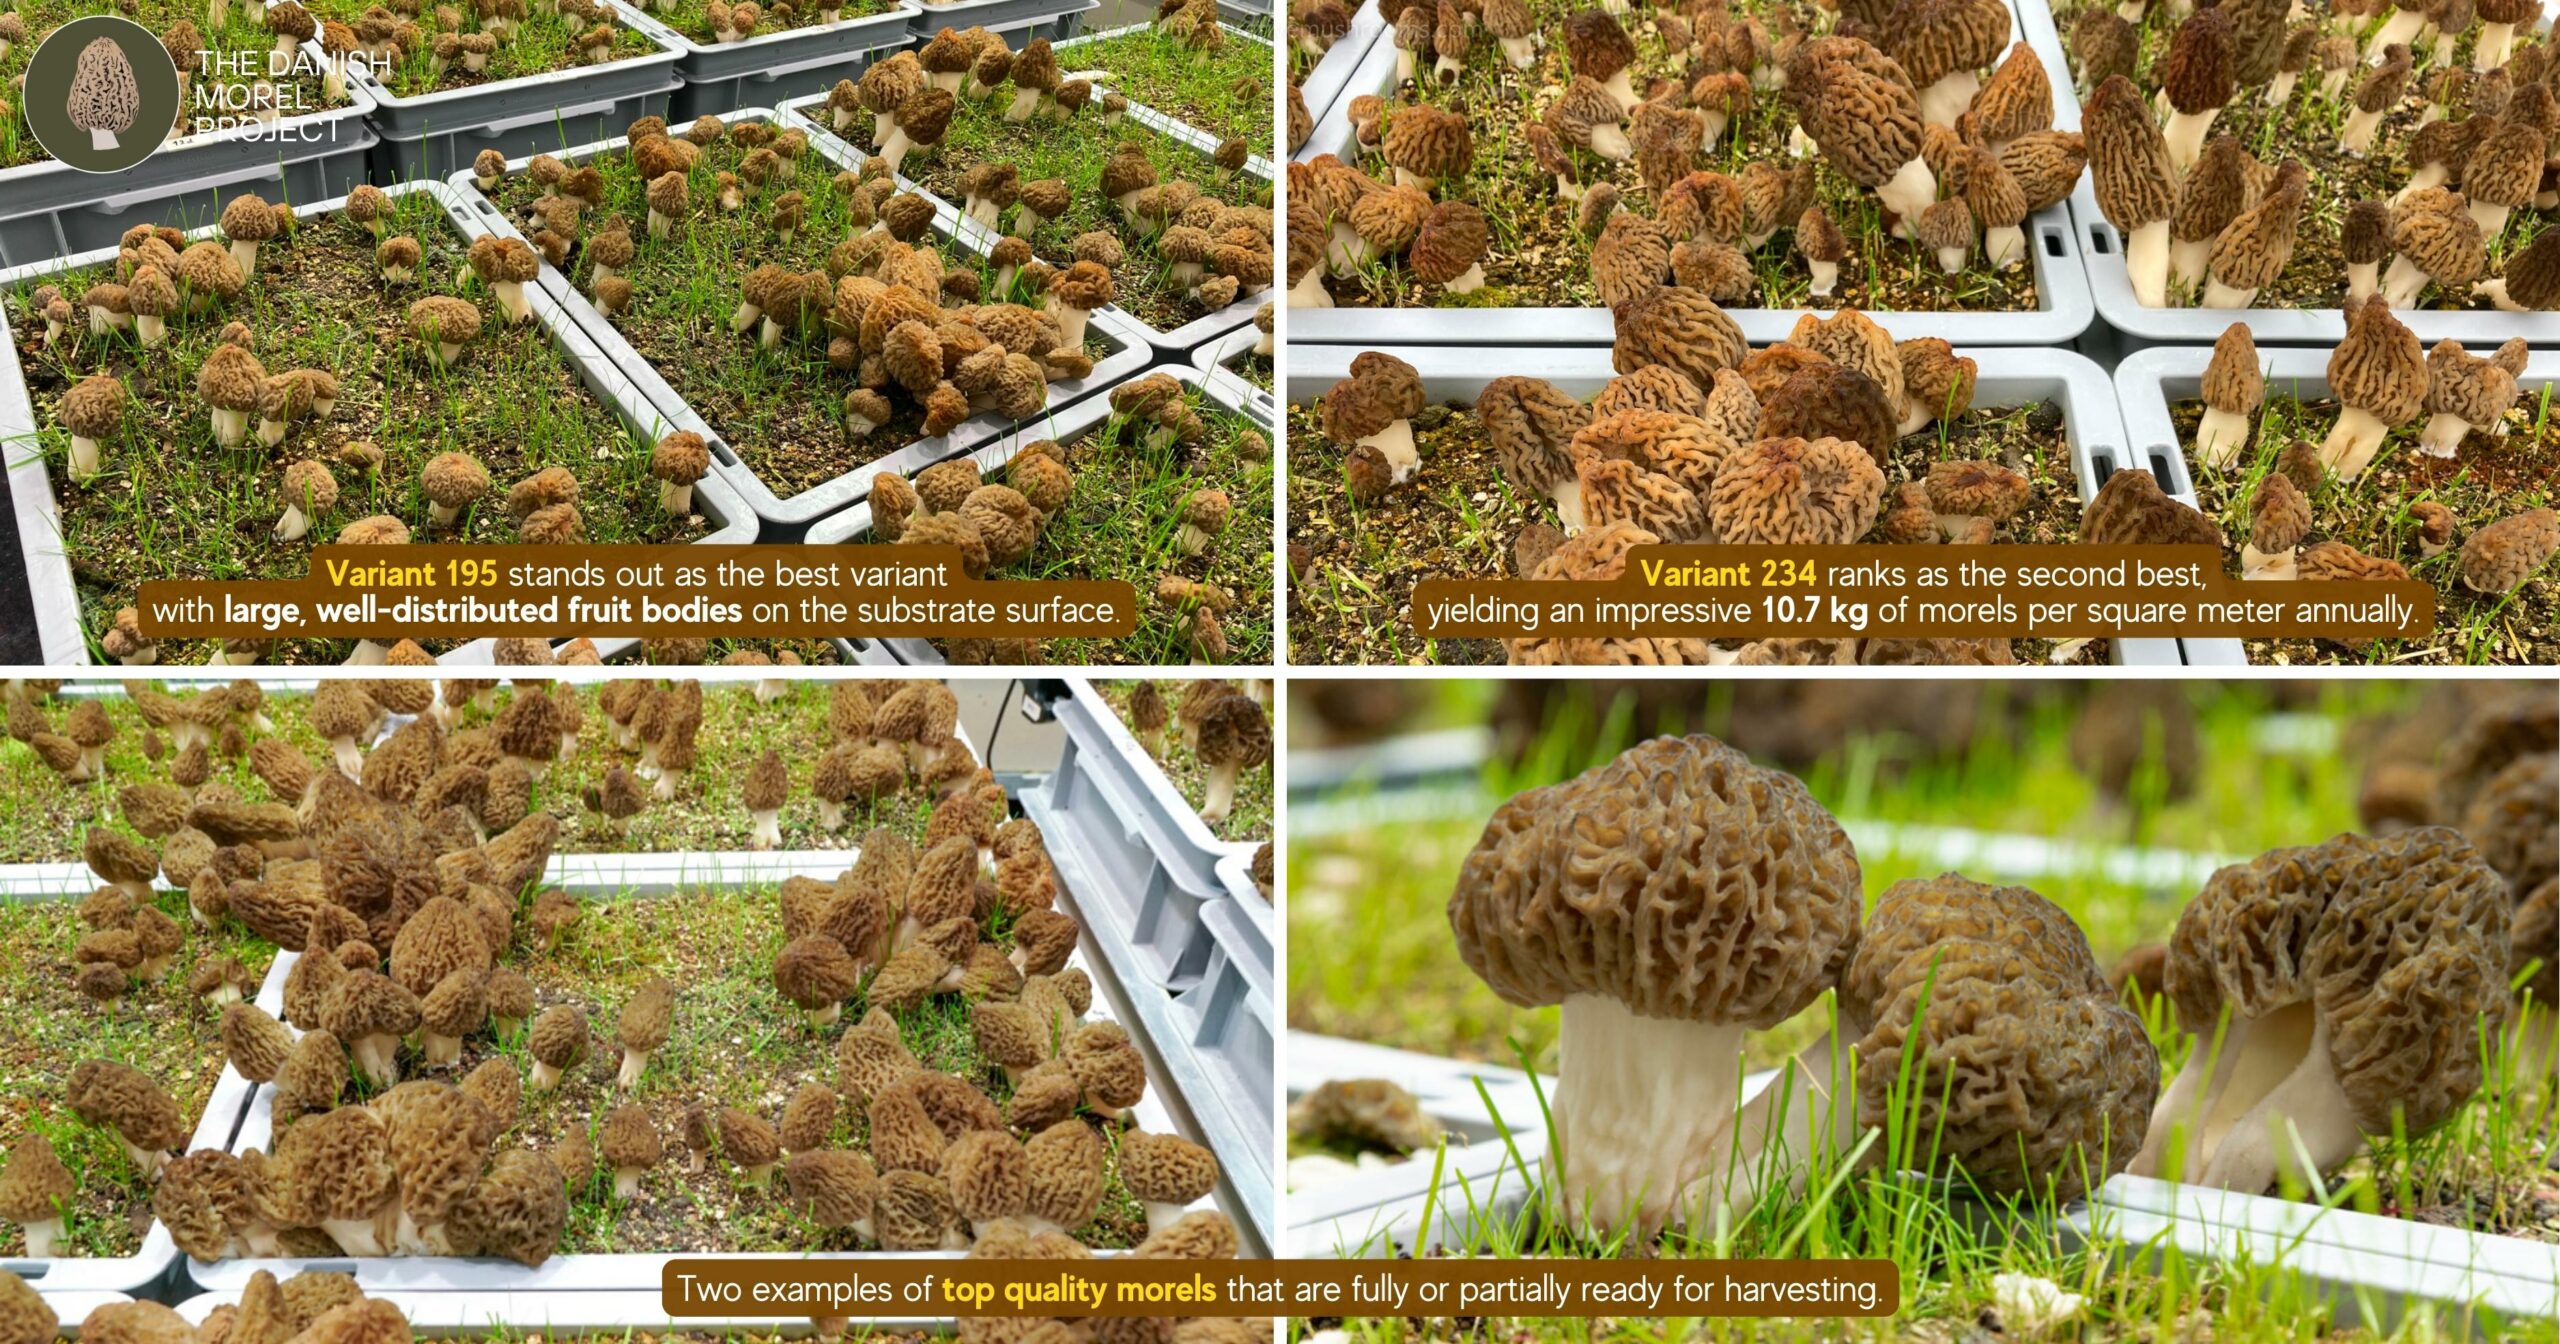 Variant 195 best variant with large well-distributed fruit bodies - Variant 234 second best yielding 10.7 kg of morels per square meter annually